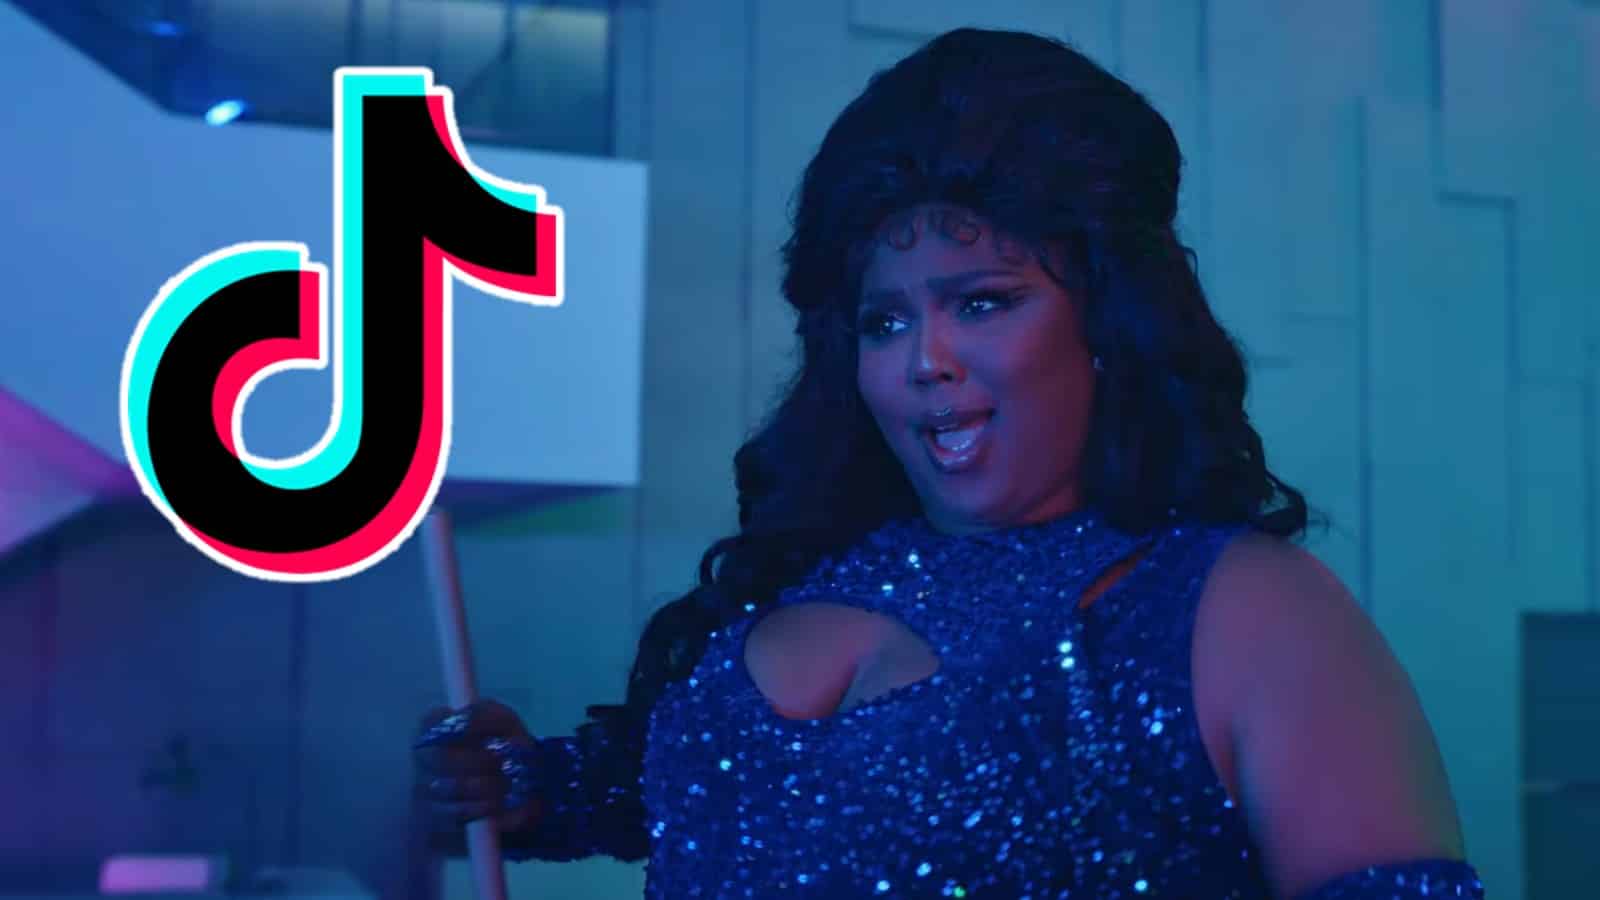 Lizzo singing in About Damn Time video with TikTok logo